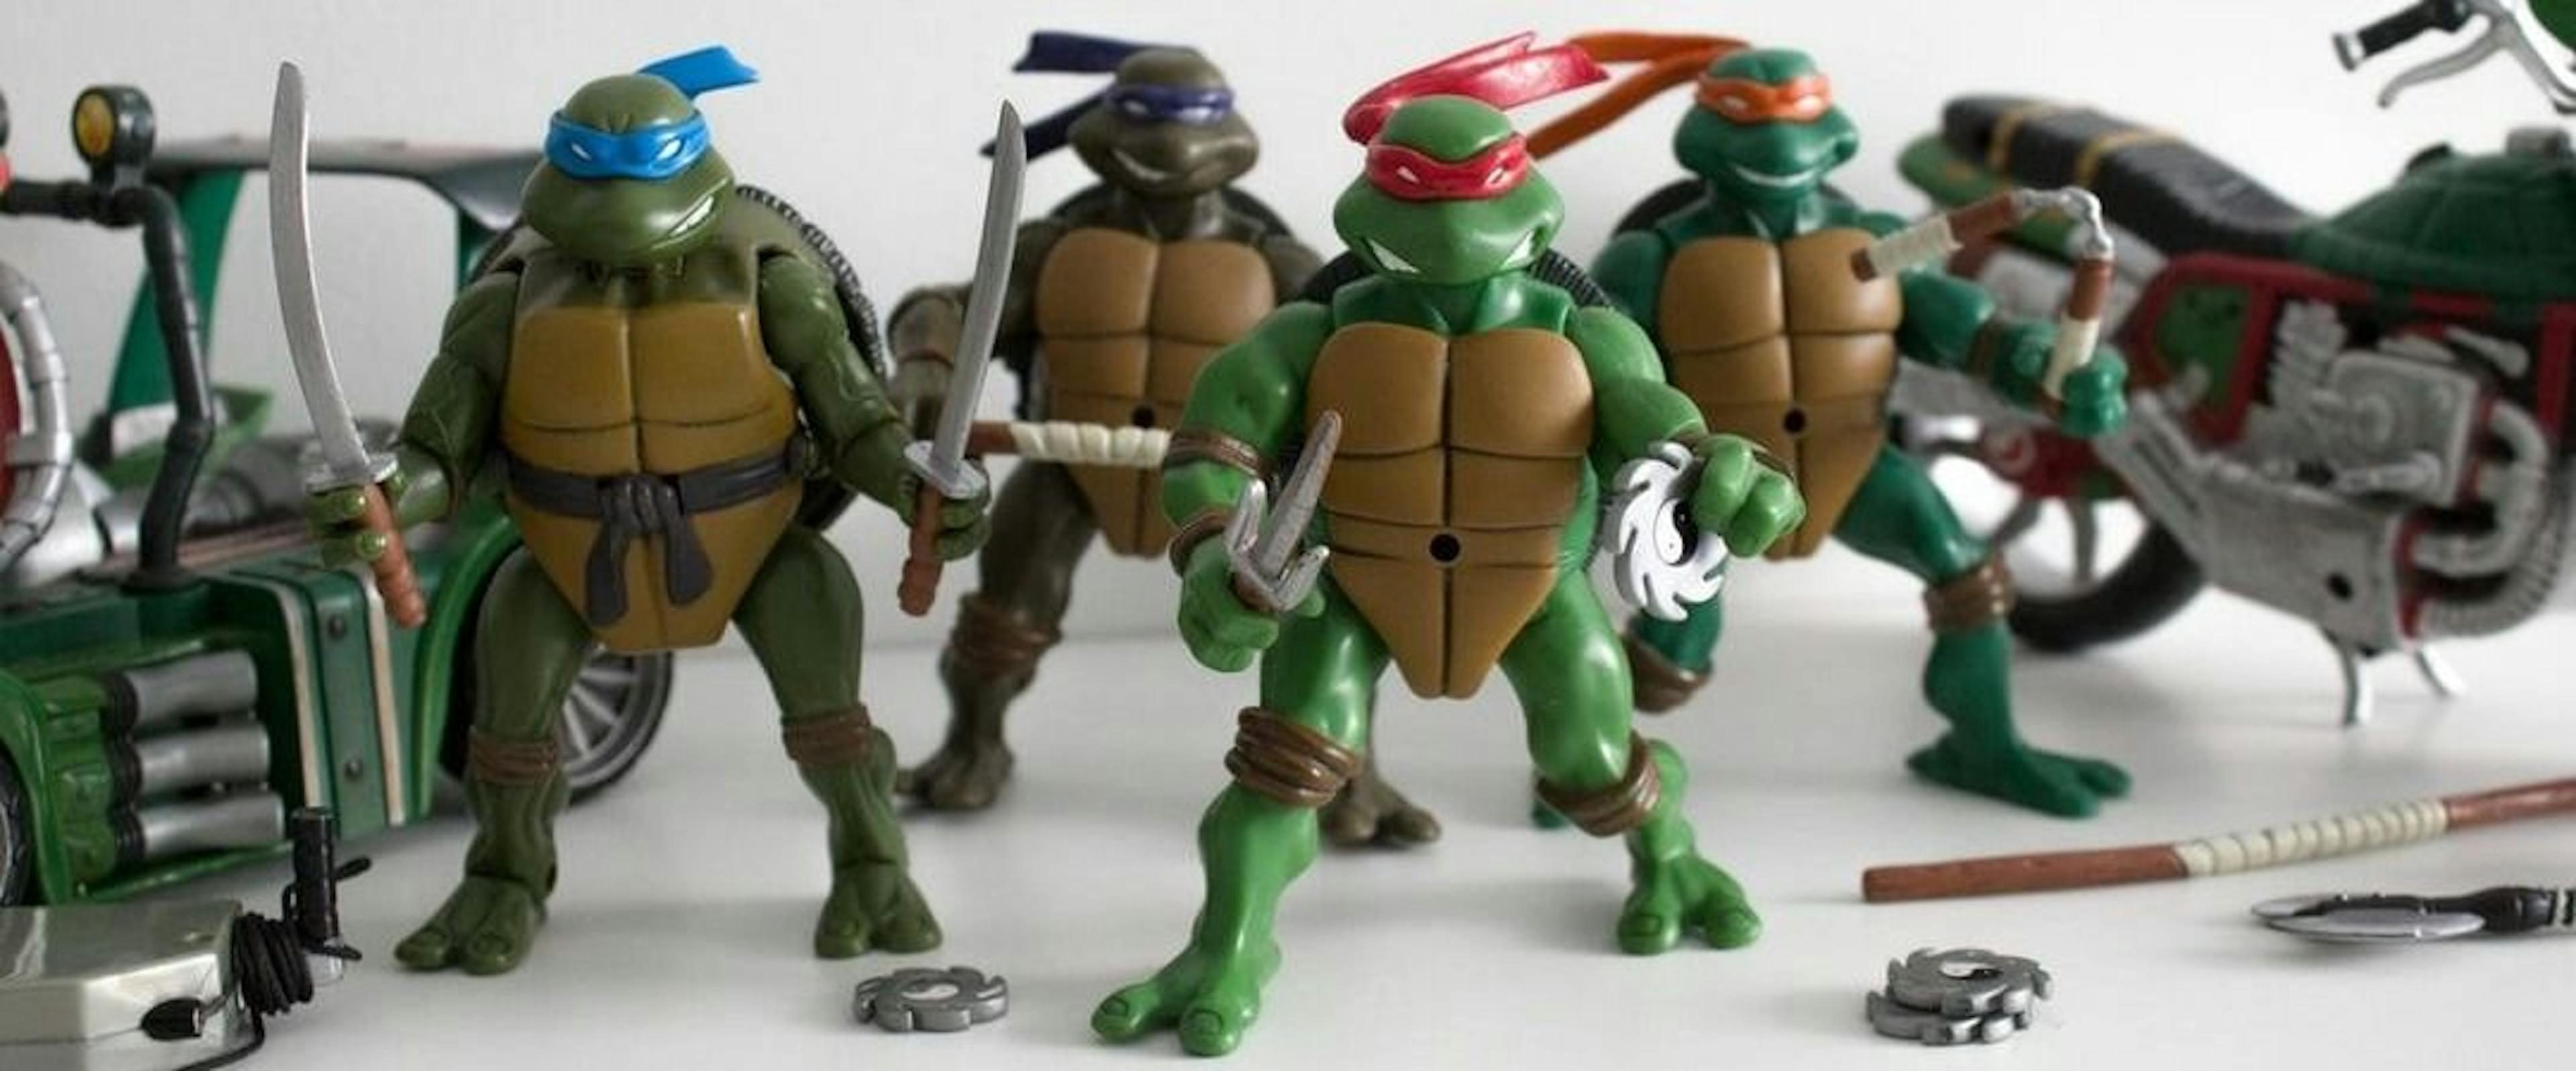 featured image - TMNT: Translation Memory and Neural Translation